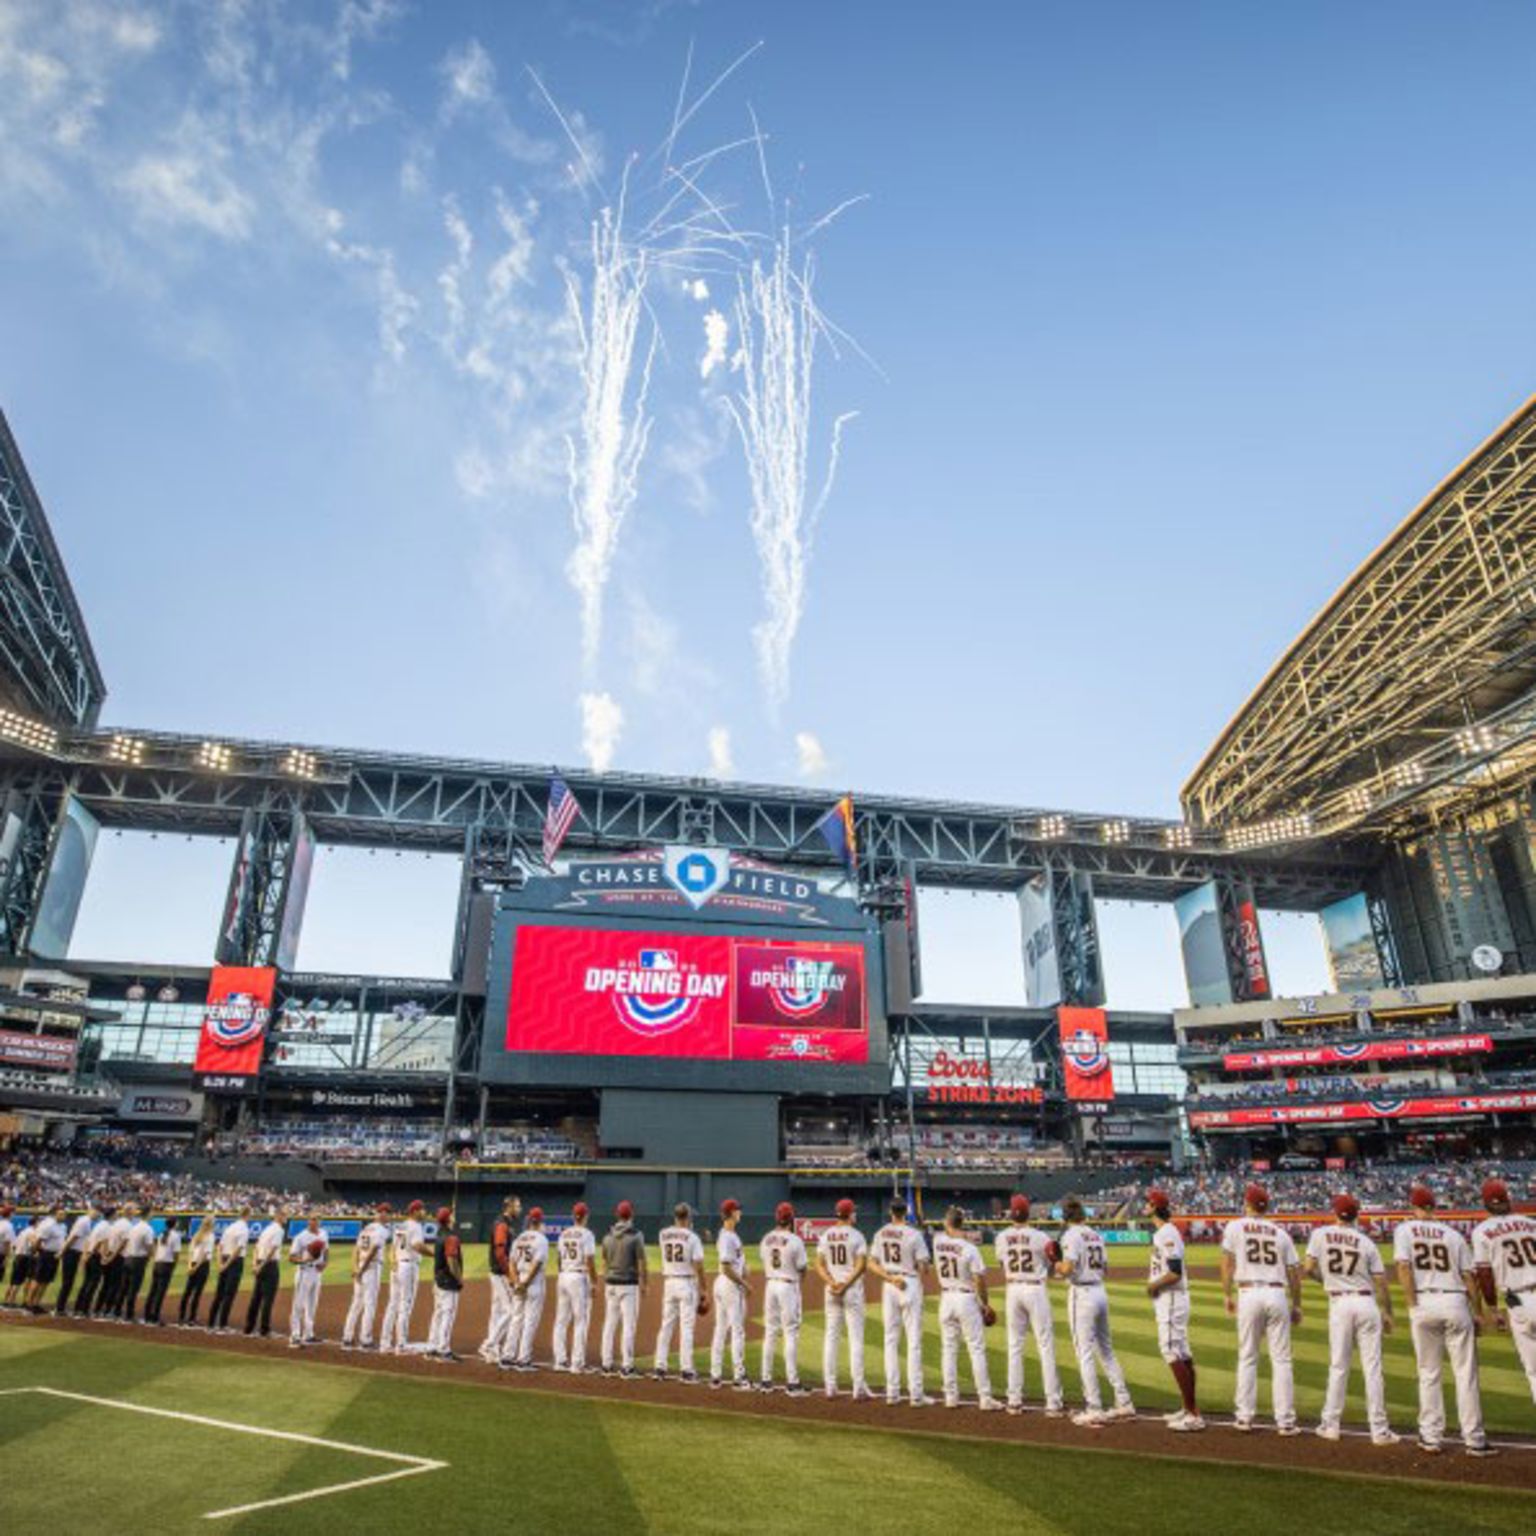 Chase Field Featured Live Event Tickets & 2023 Schedules